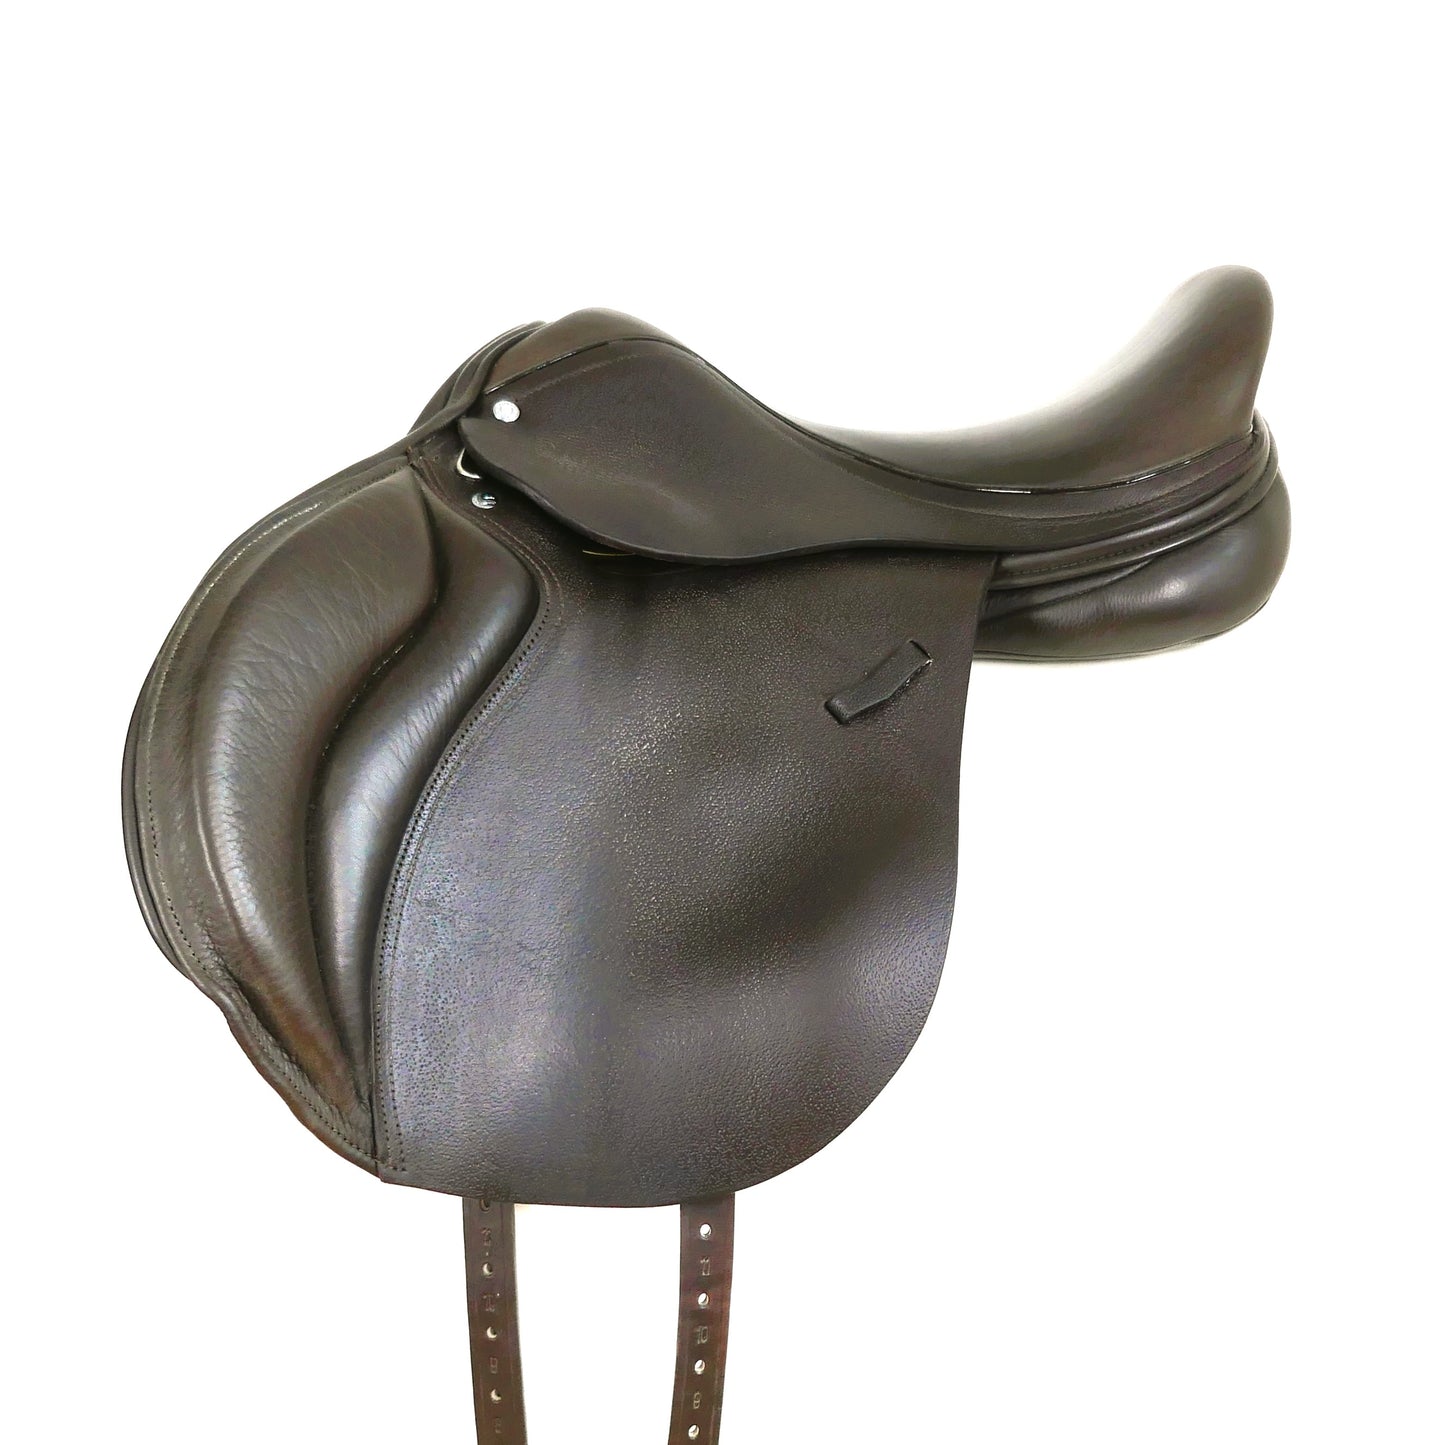 Loxley by Bliss Foxhunter Jumping Saddle - 16.5" Wide Brown TF108